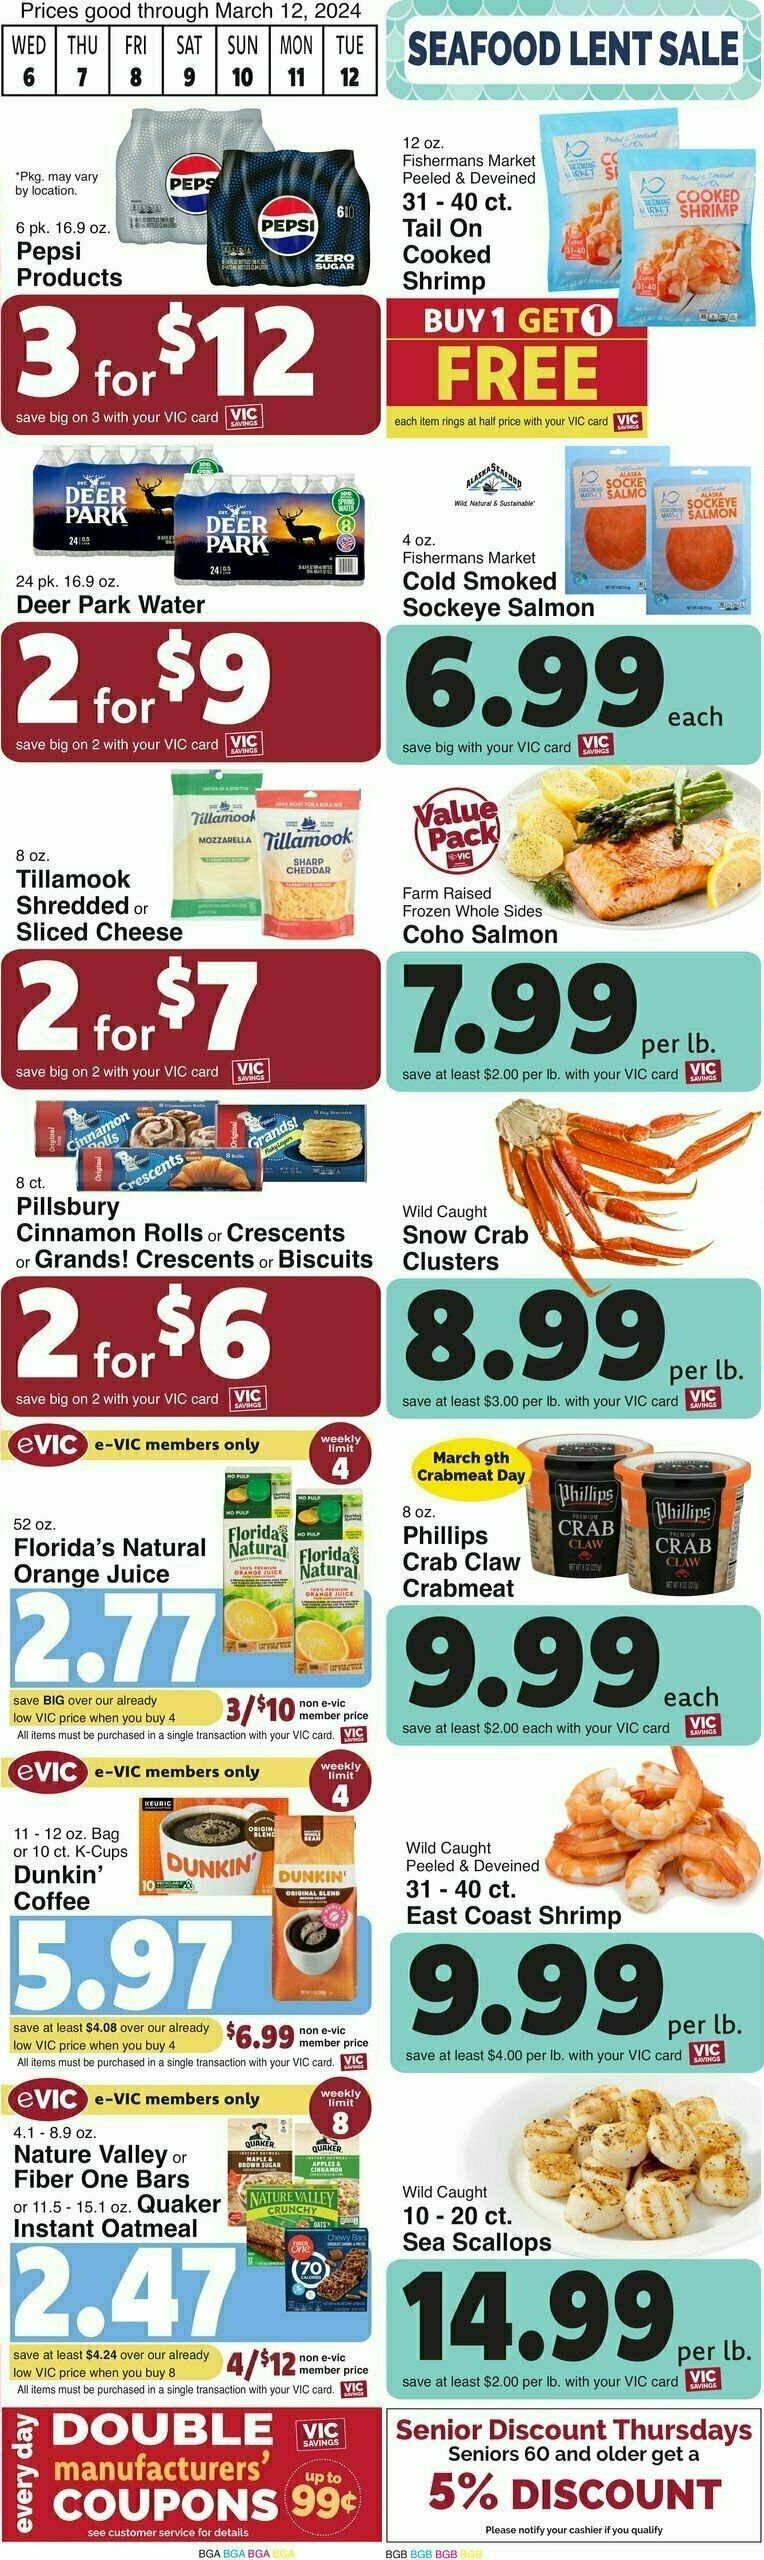 Harris Teeter Weekly Ad from March 6